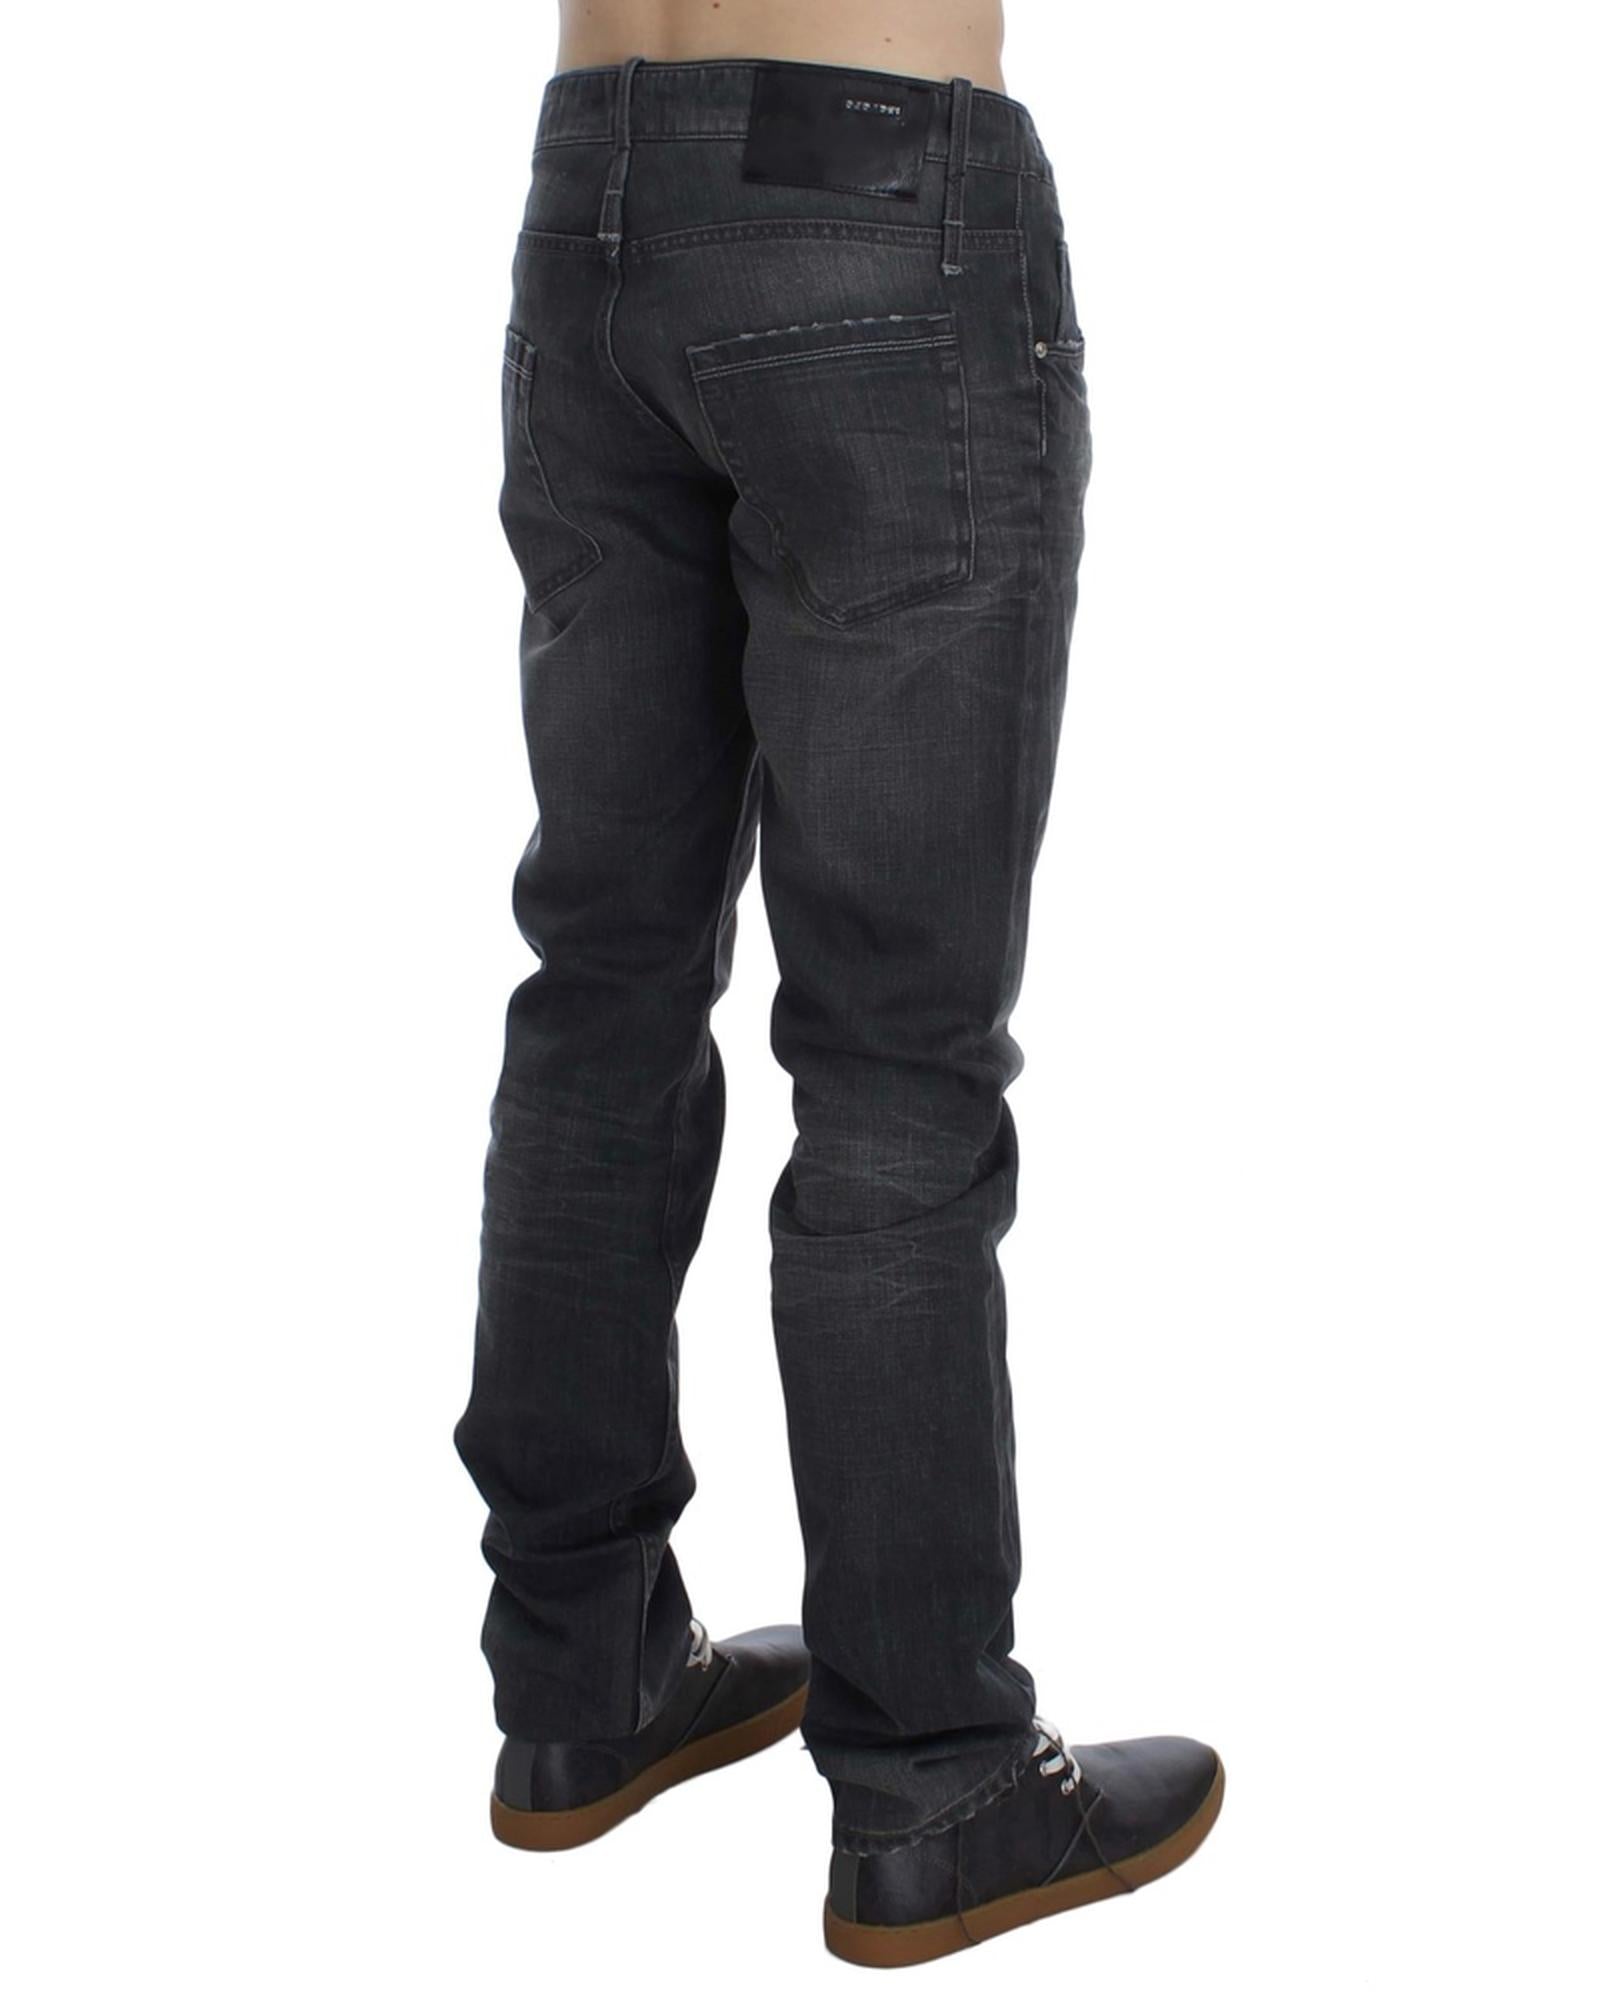 ACHT Mens Jeans - Straight Regular Fit with Logo Details W34 US Men